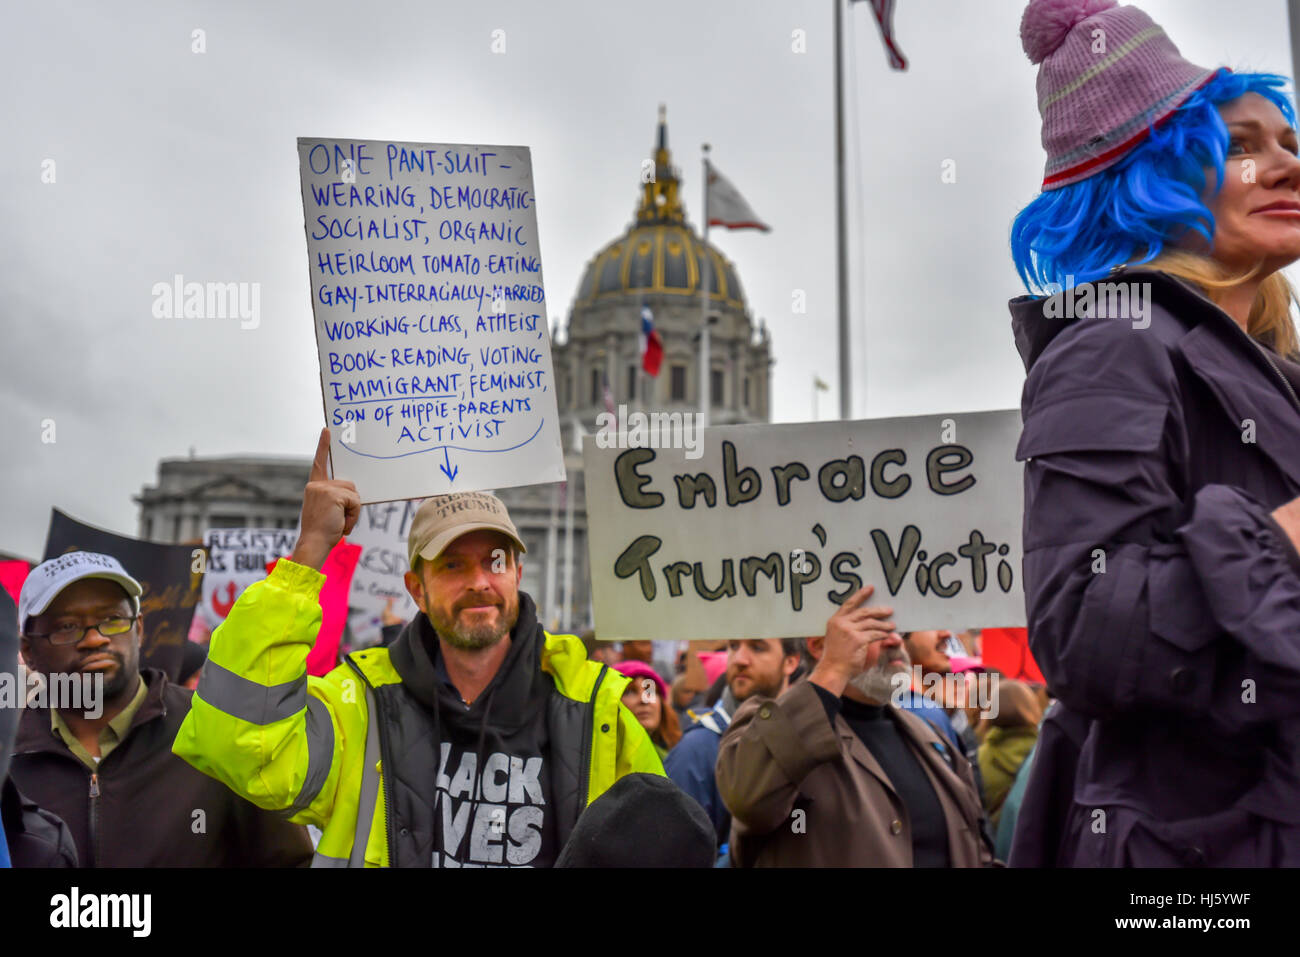 San Francisco, California, USA. 21st January, 2017. Protestors at San Francisco Women's March 2017, holding signs about wearing pant suits, being gay, and generally San Franciscan. Credit: Shelly Rivoli/Alamy Live News Stock Photo